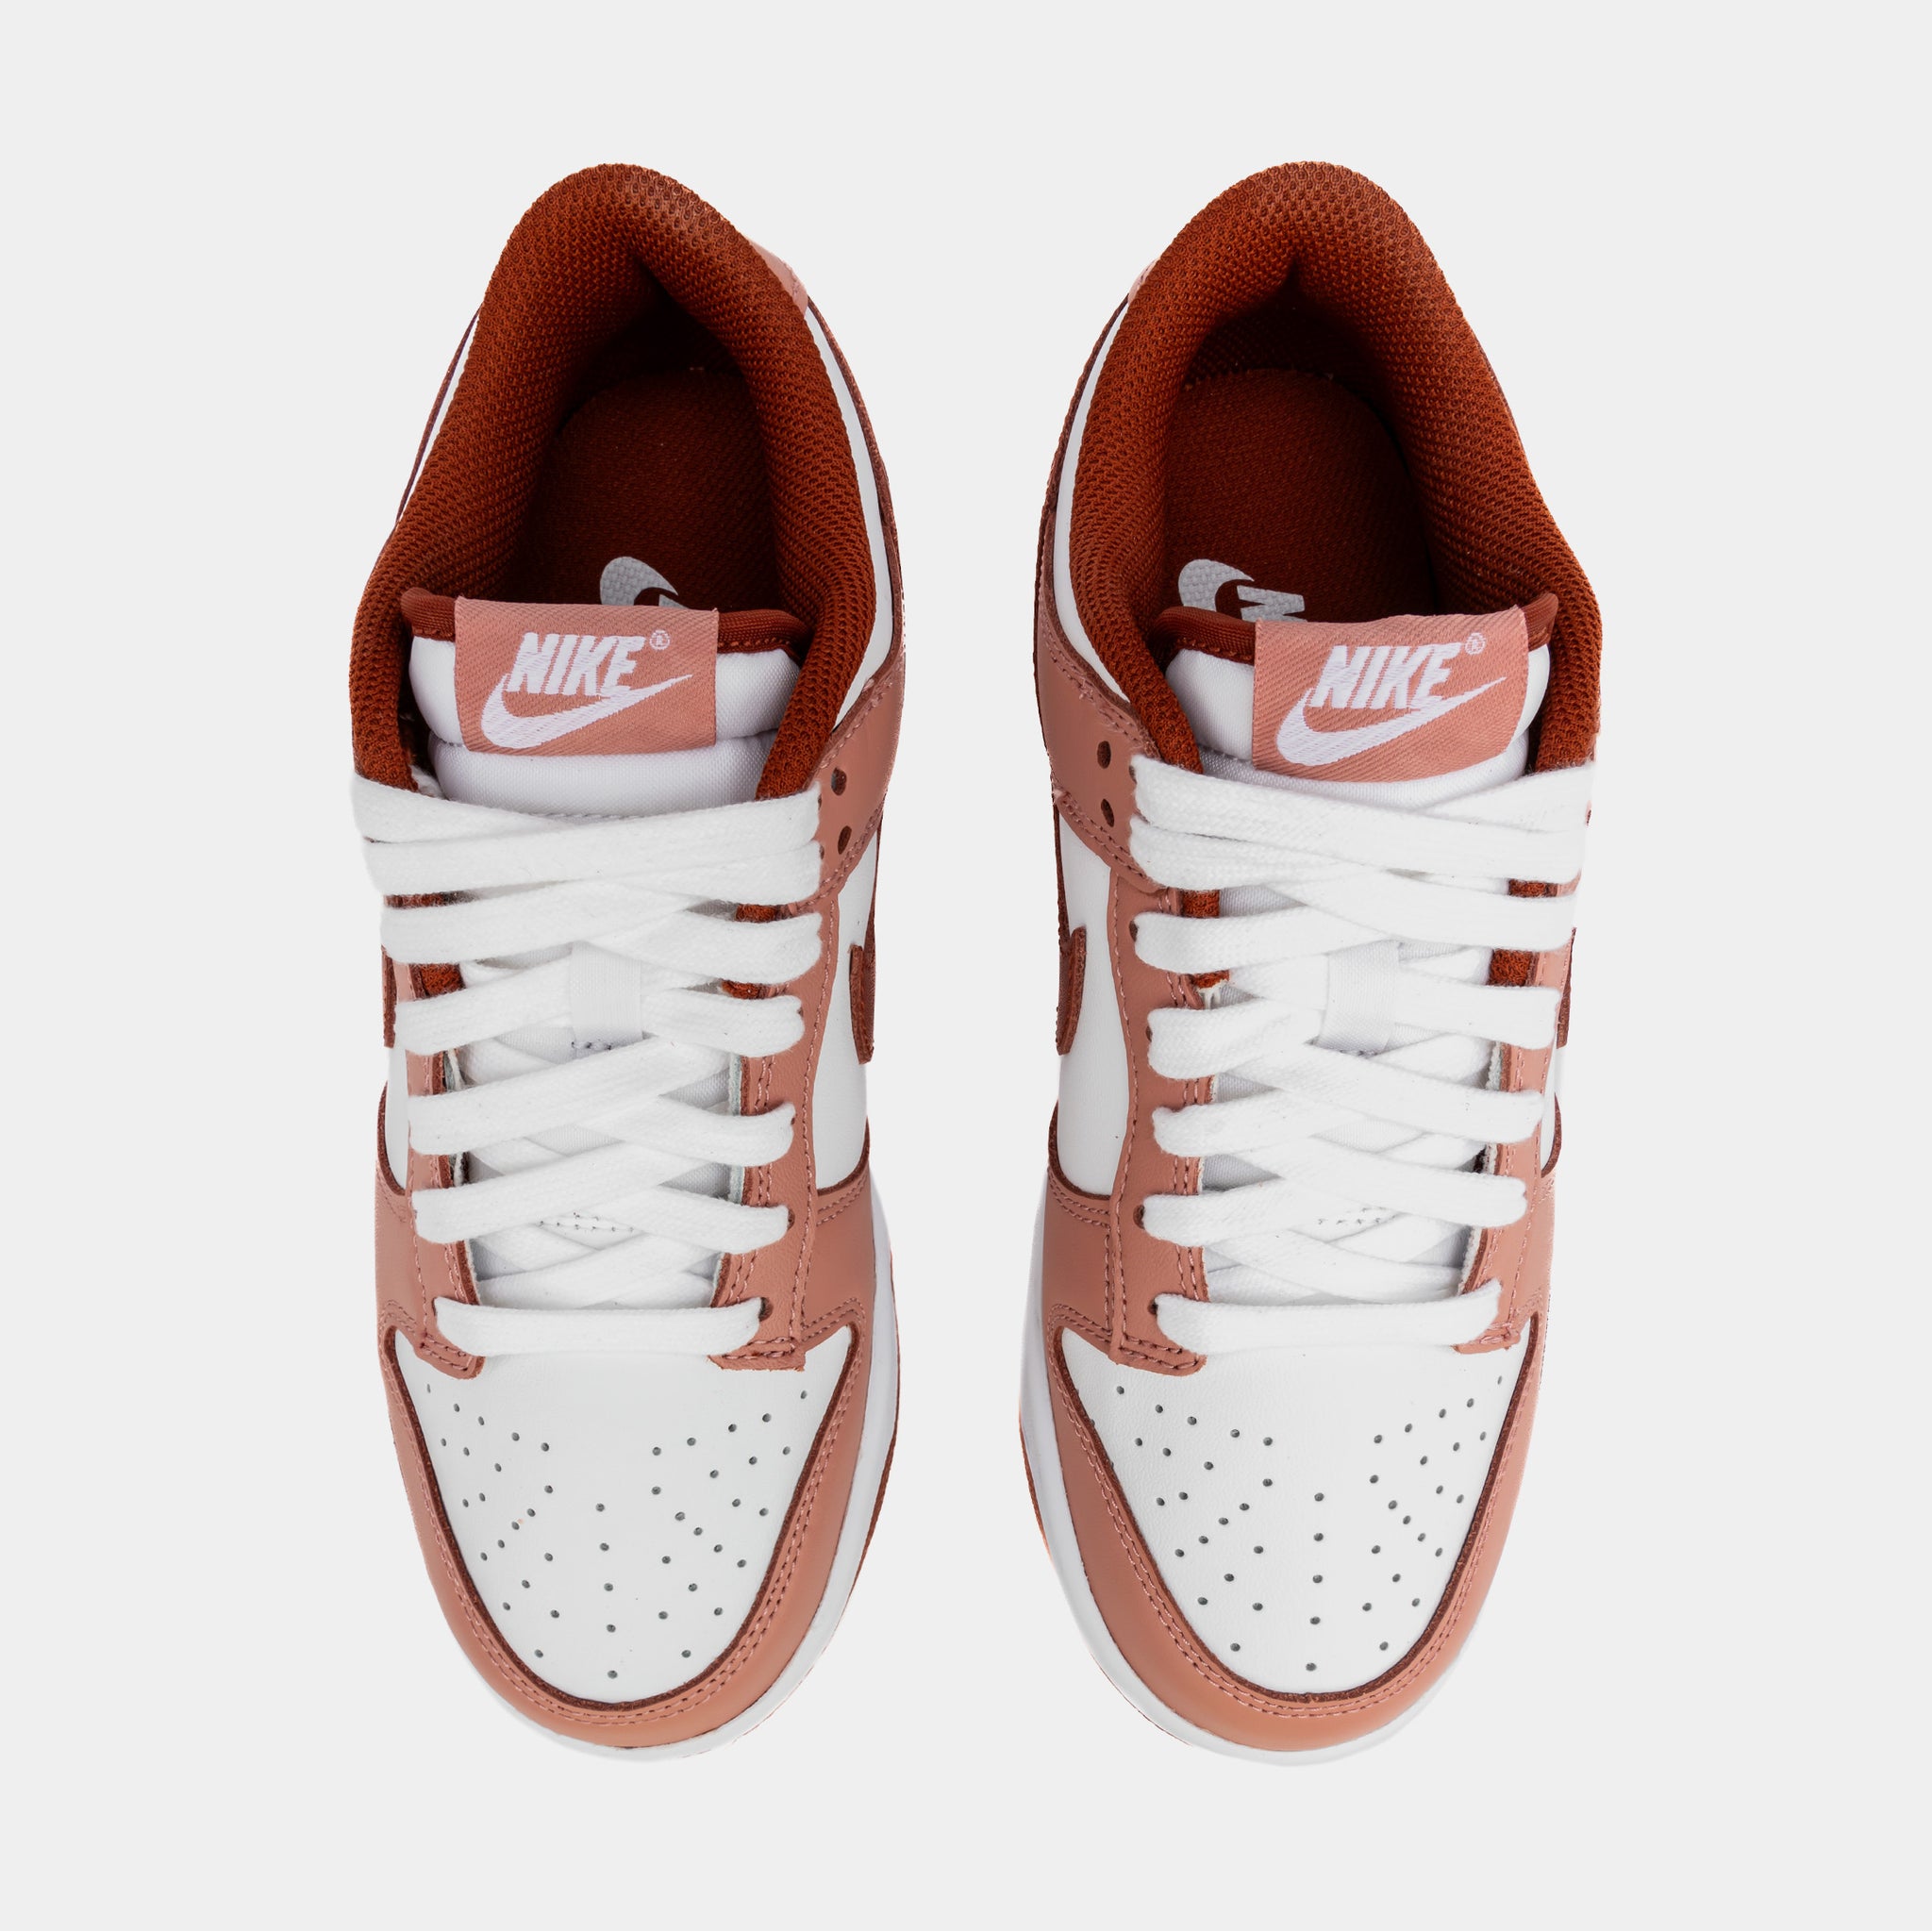 Nike Dunk Low Rugged Orange Womens Lifestyle Shoes Red Stardust